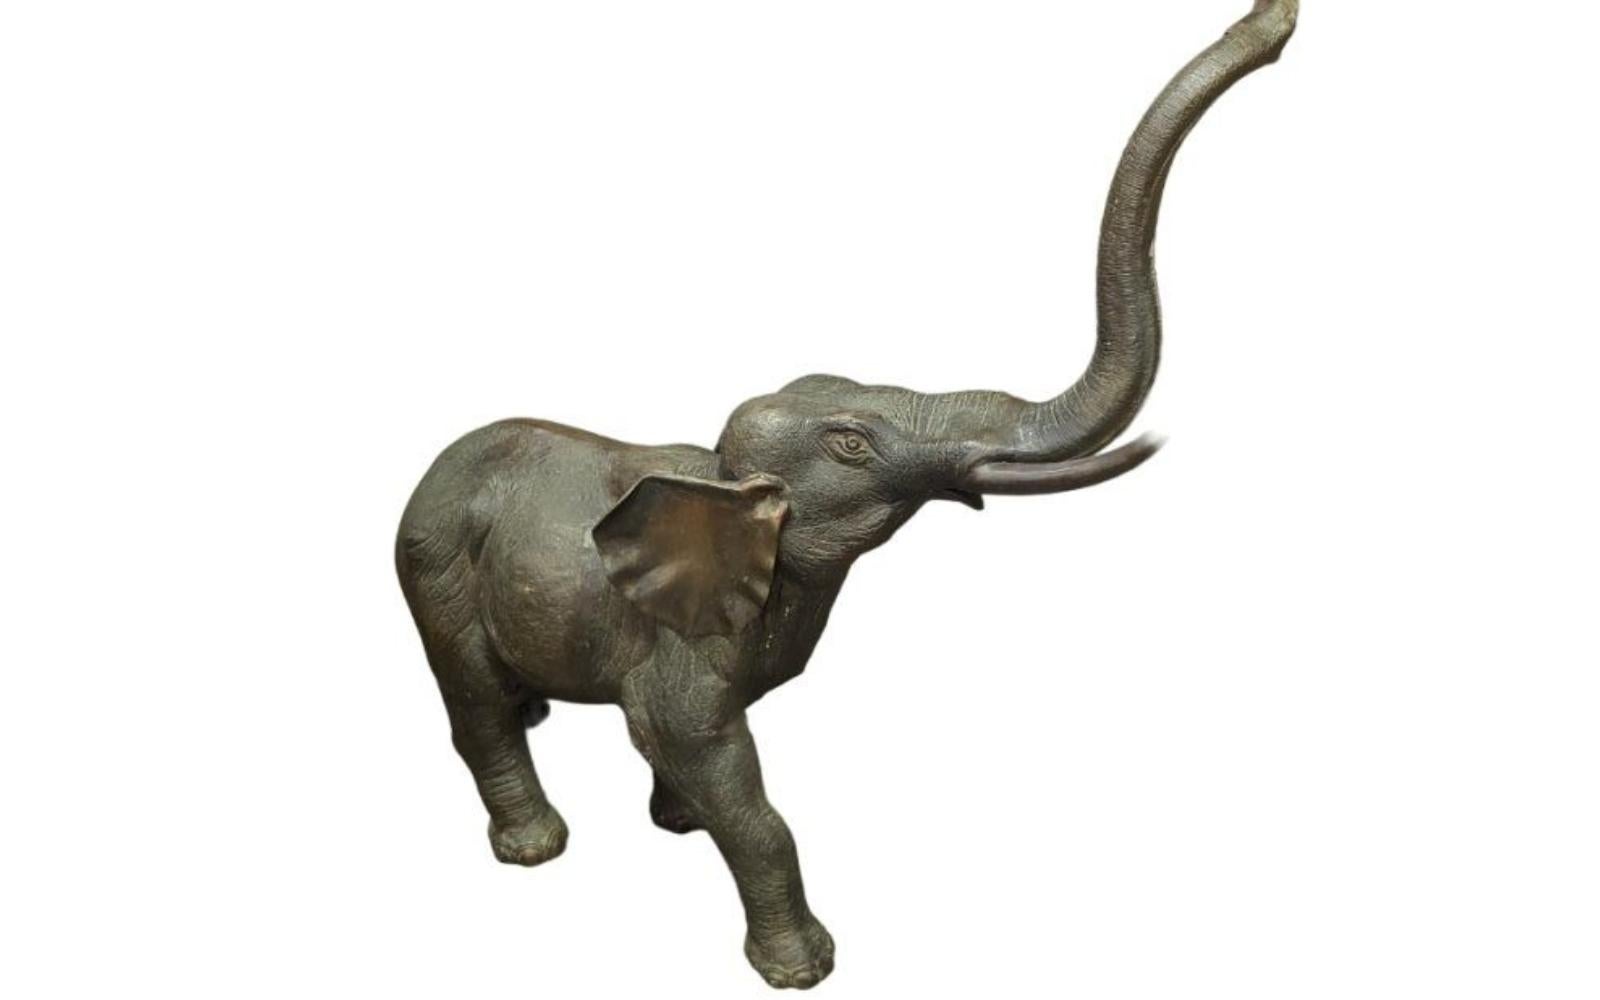 Very unique and large bronze elephant sculpture. It is very skillfully done with a lot of nice details. A great accent piece for any room.  Height: 47.25 in, Length: 15 in, Width: 44 in, Base Length: 15 in, Base Width: 30 in